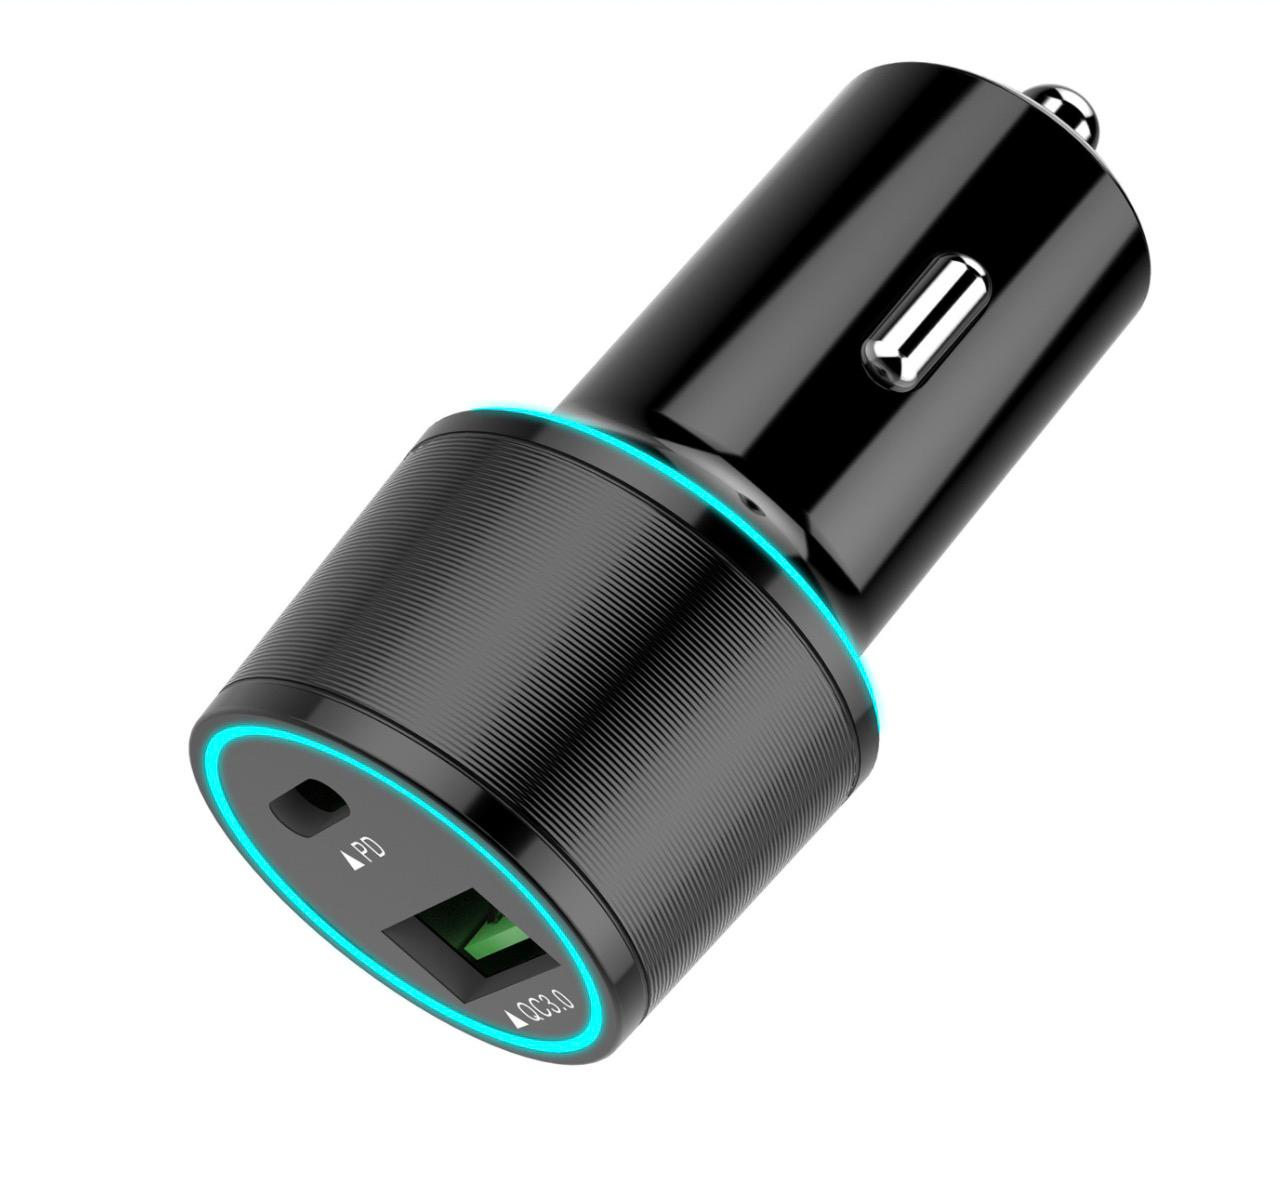 USB C Car Charger UrbanX 20W Car and Truck Charger For BLU Vivo XI+ with Power Delivery 3.0 Cigarette Lighter USB Charger - Black, Comes with USB C to USB C PD Cable 3.3FT 1M - image 2 of 3